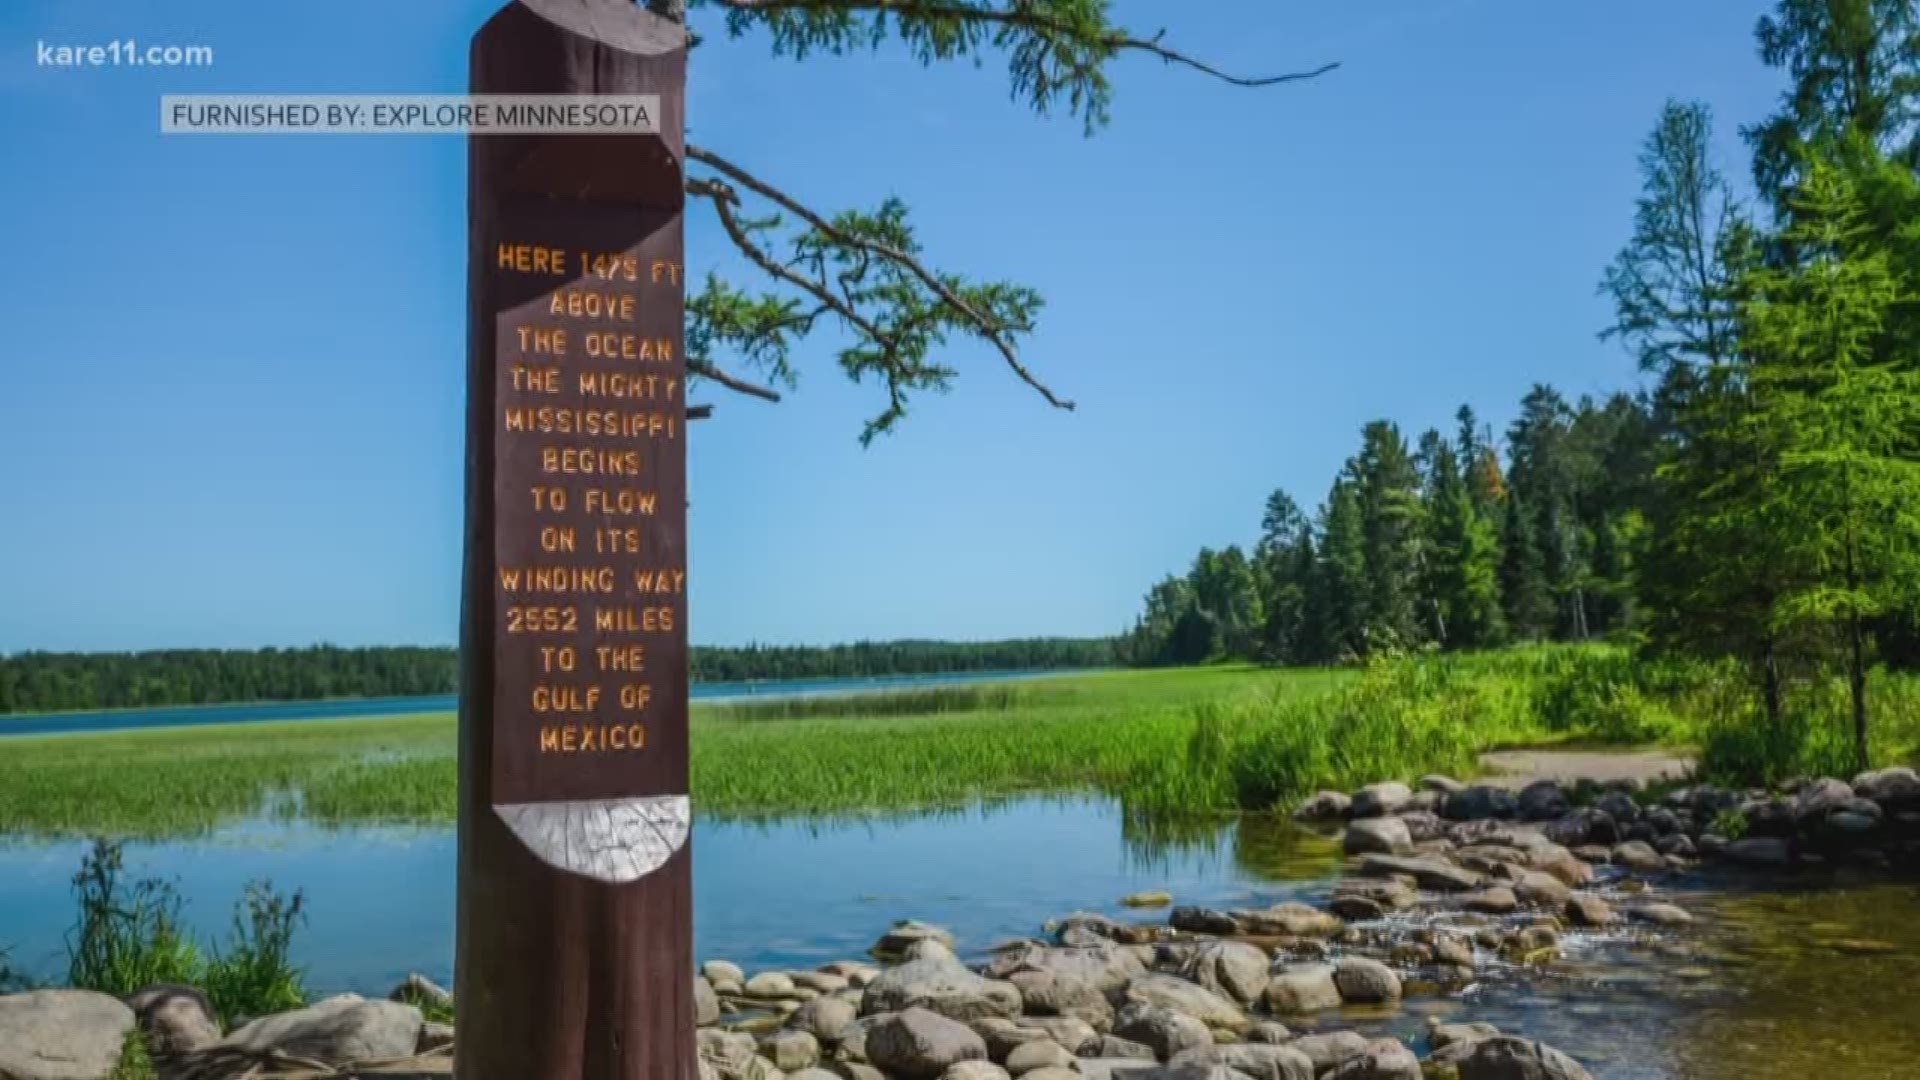 Explore Minnesota shares great places to see and things to do from border to border.